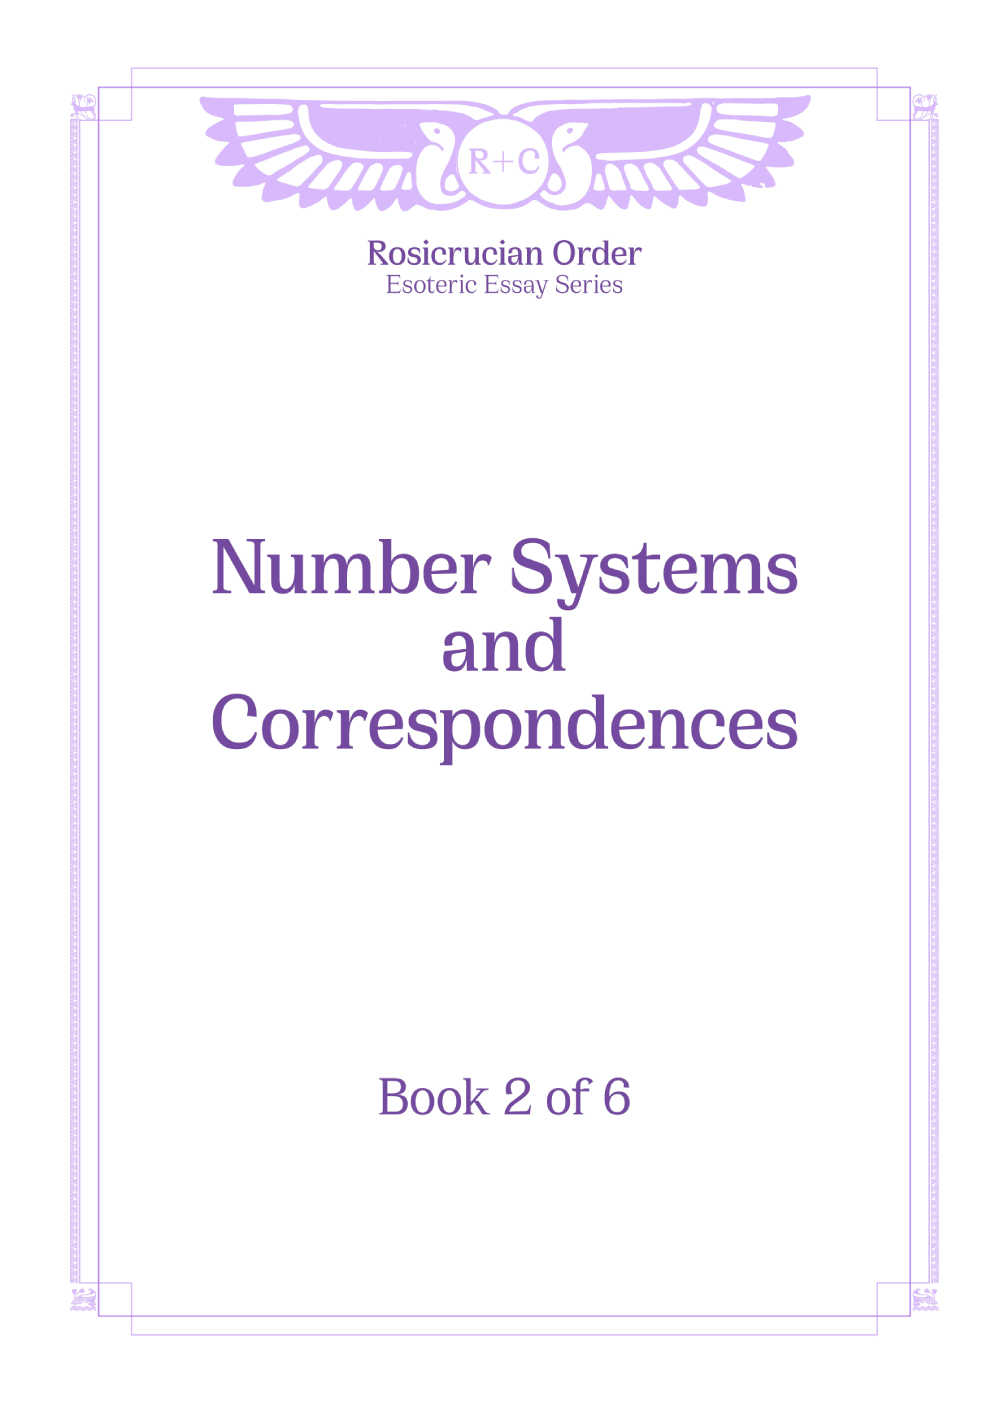 Esoteric Essays - Number Systems and Correspondences